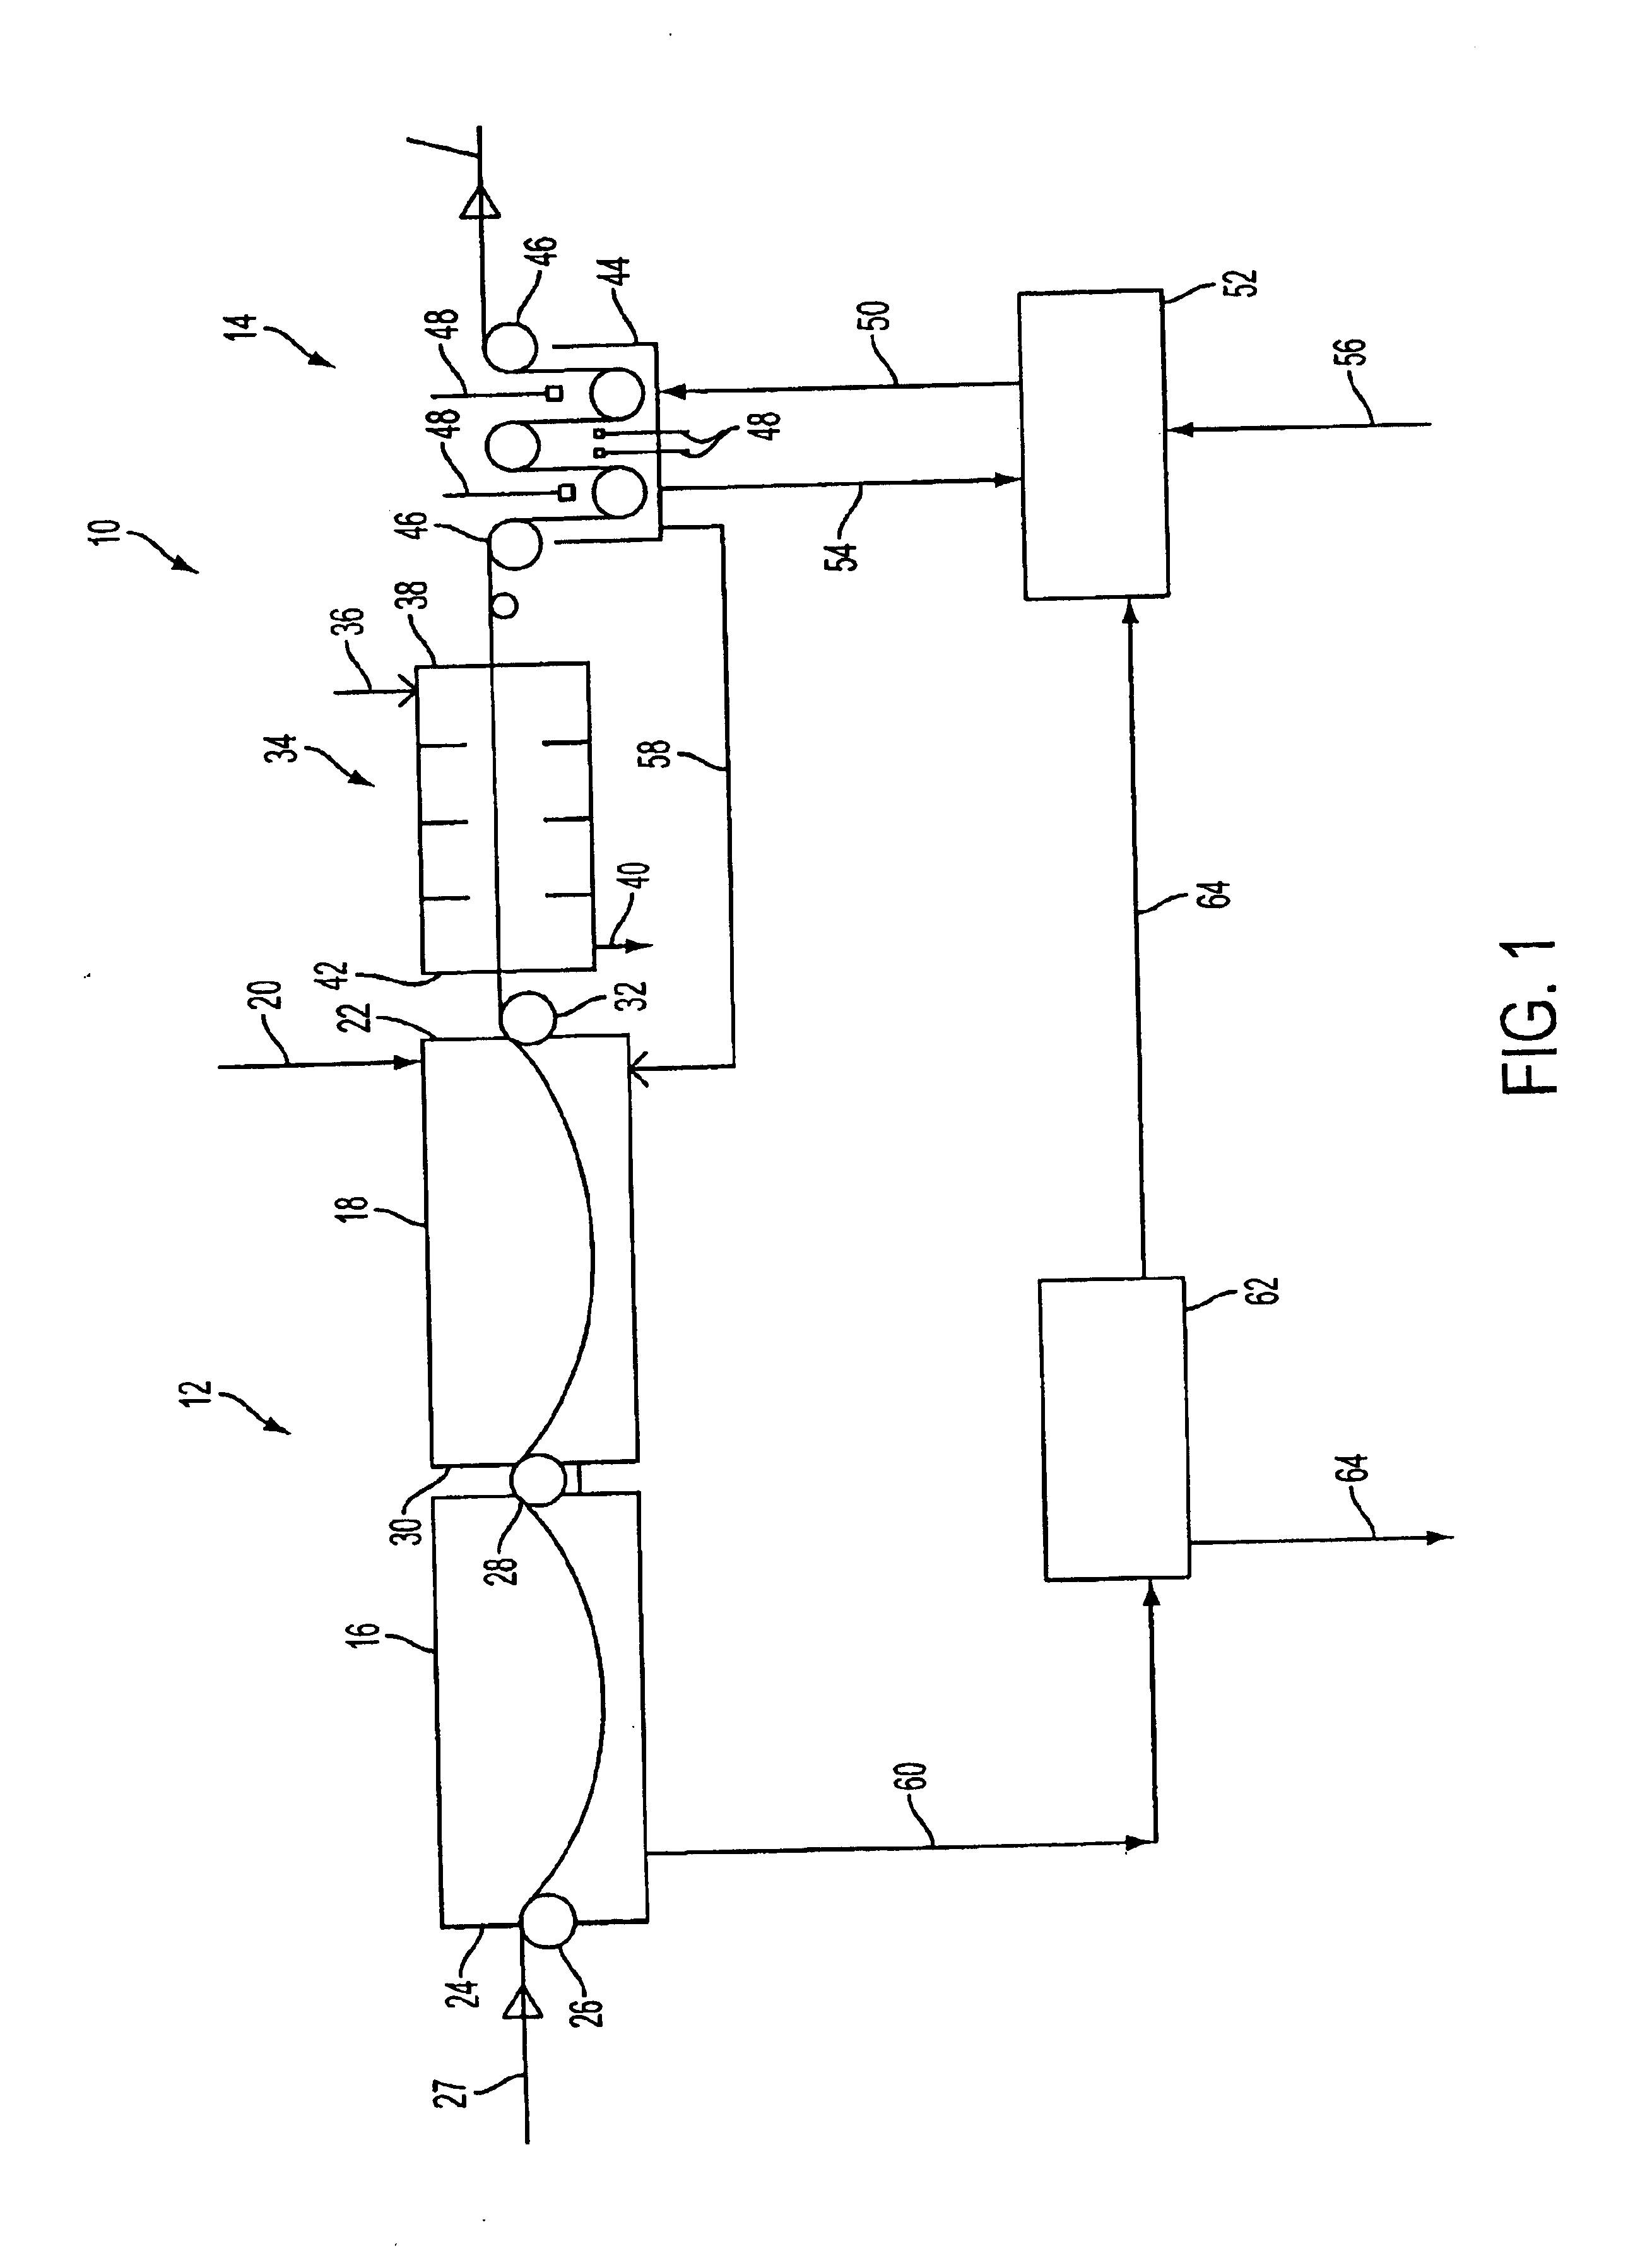 Apparatus for electrically coating a hot-rolled steel substrate